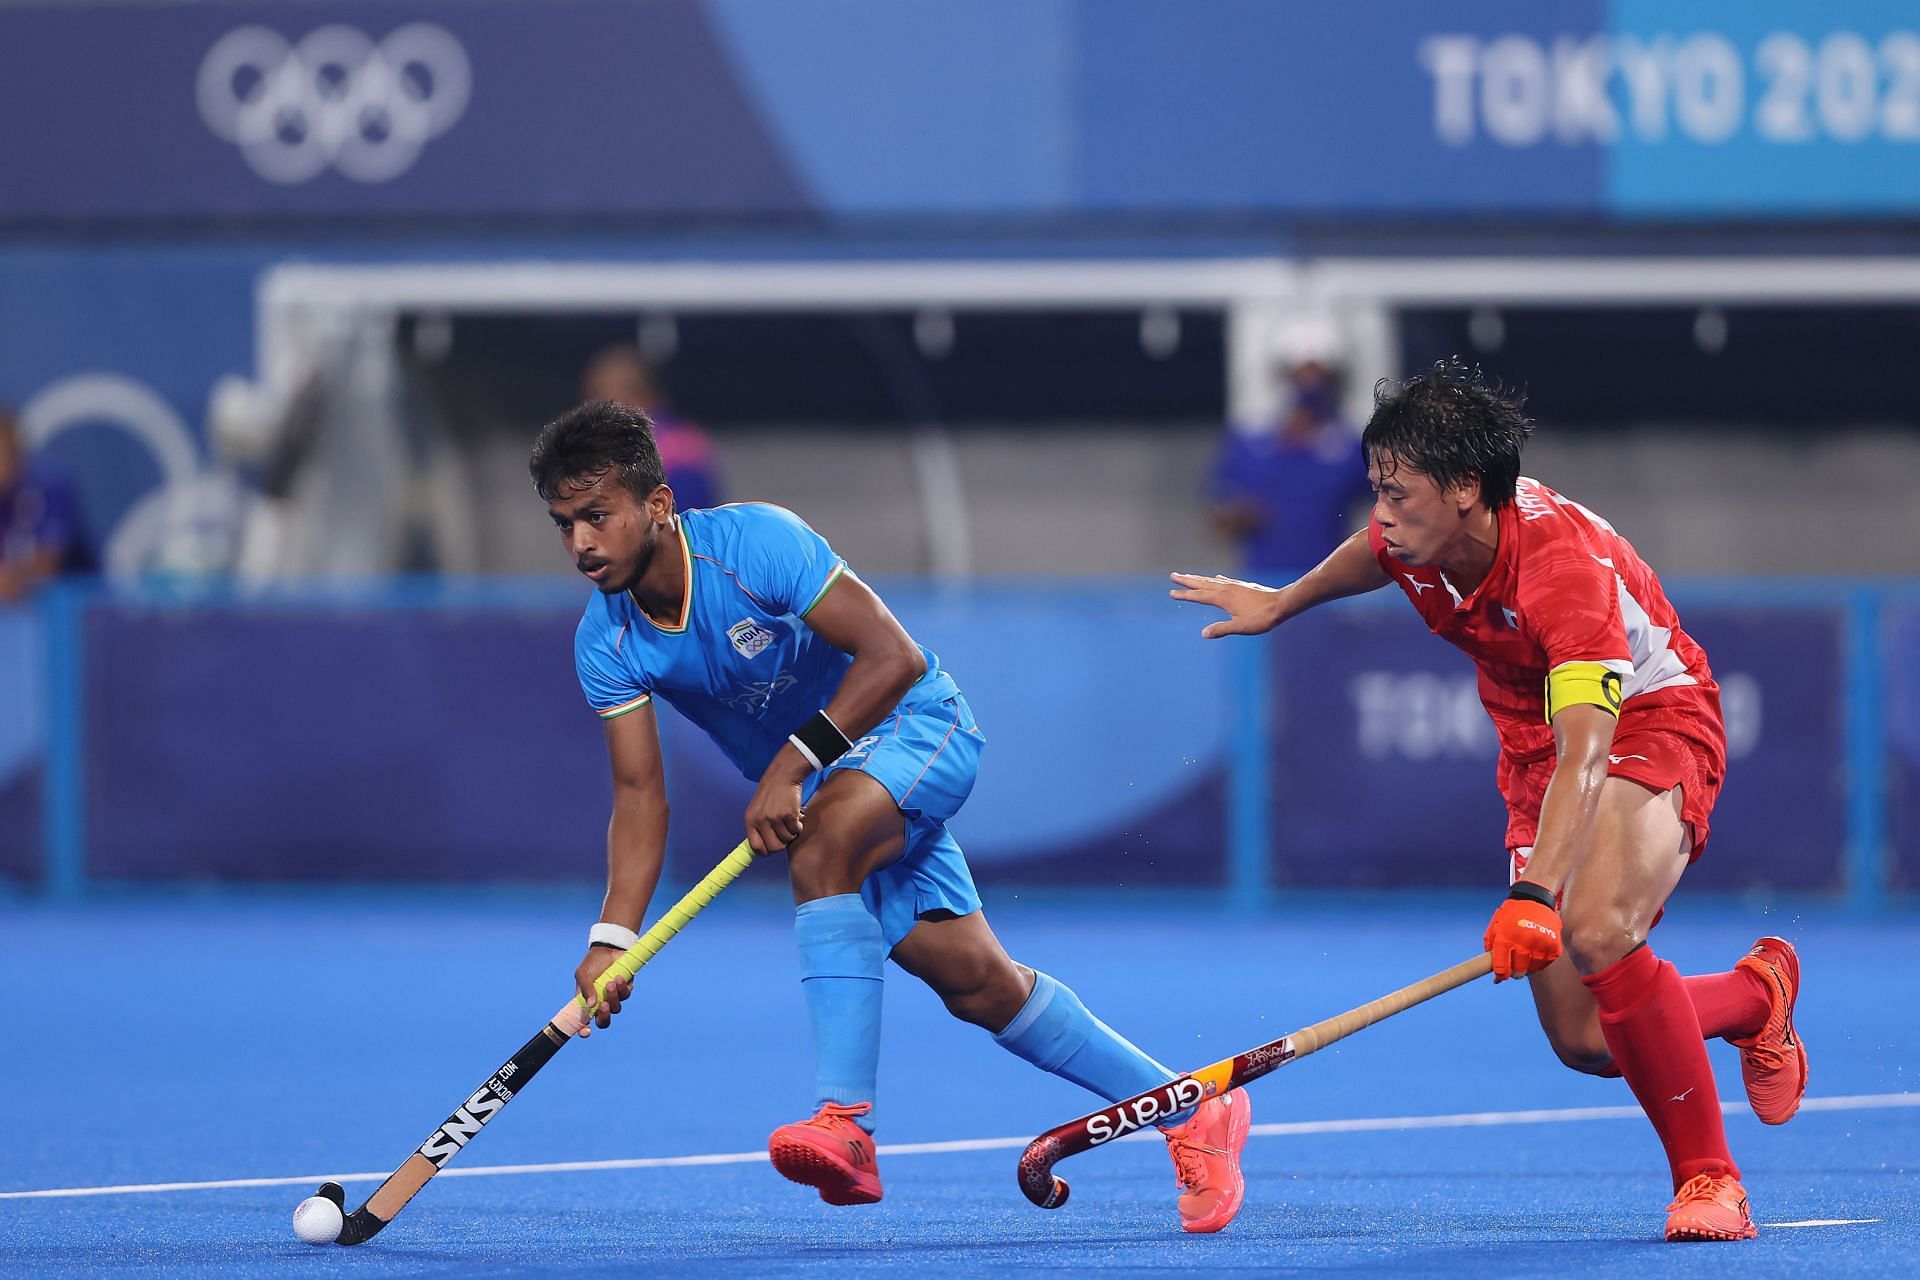 Vivek Sagar Prasad in action at the Tokyo Olympics. (PC: Getty Images)